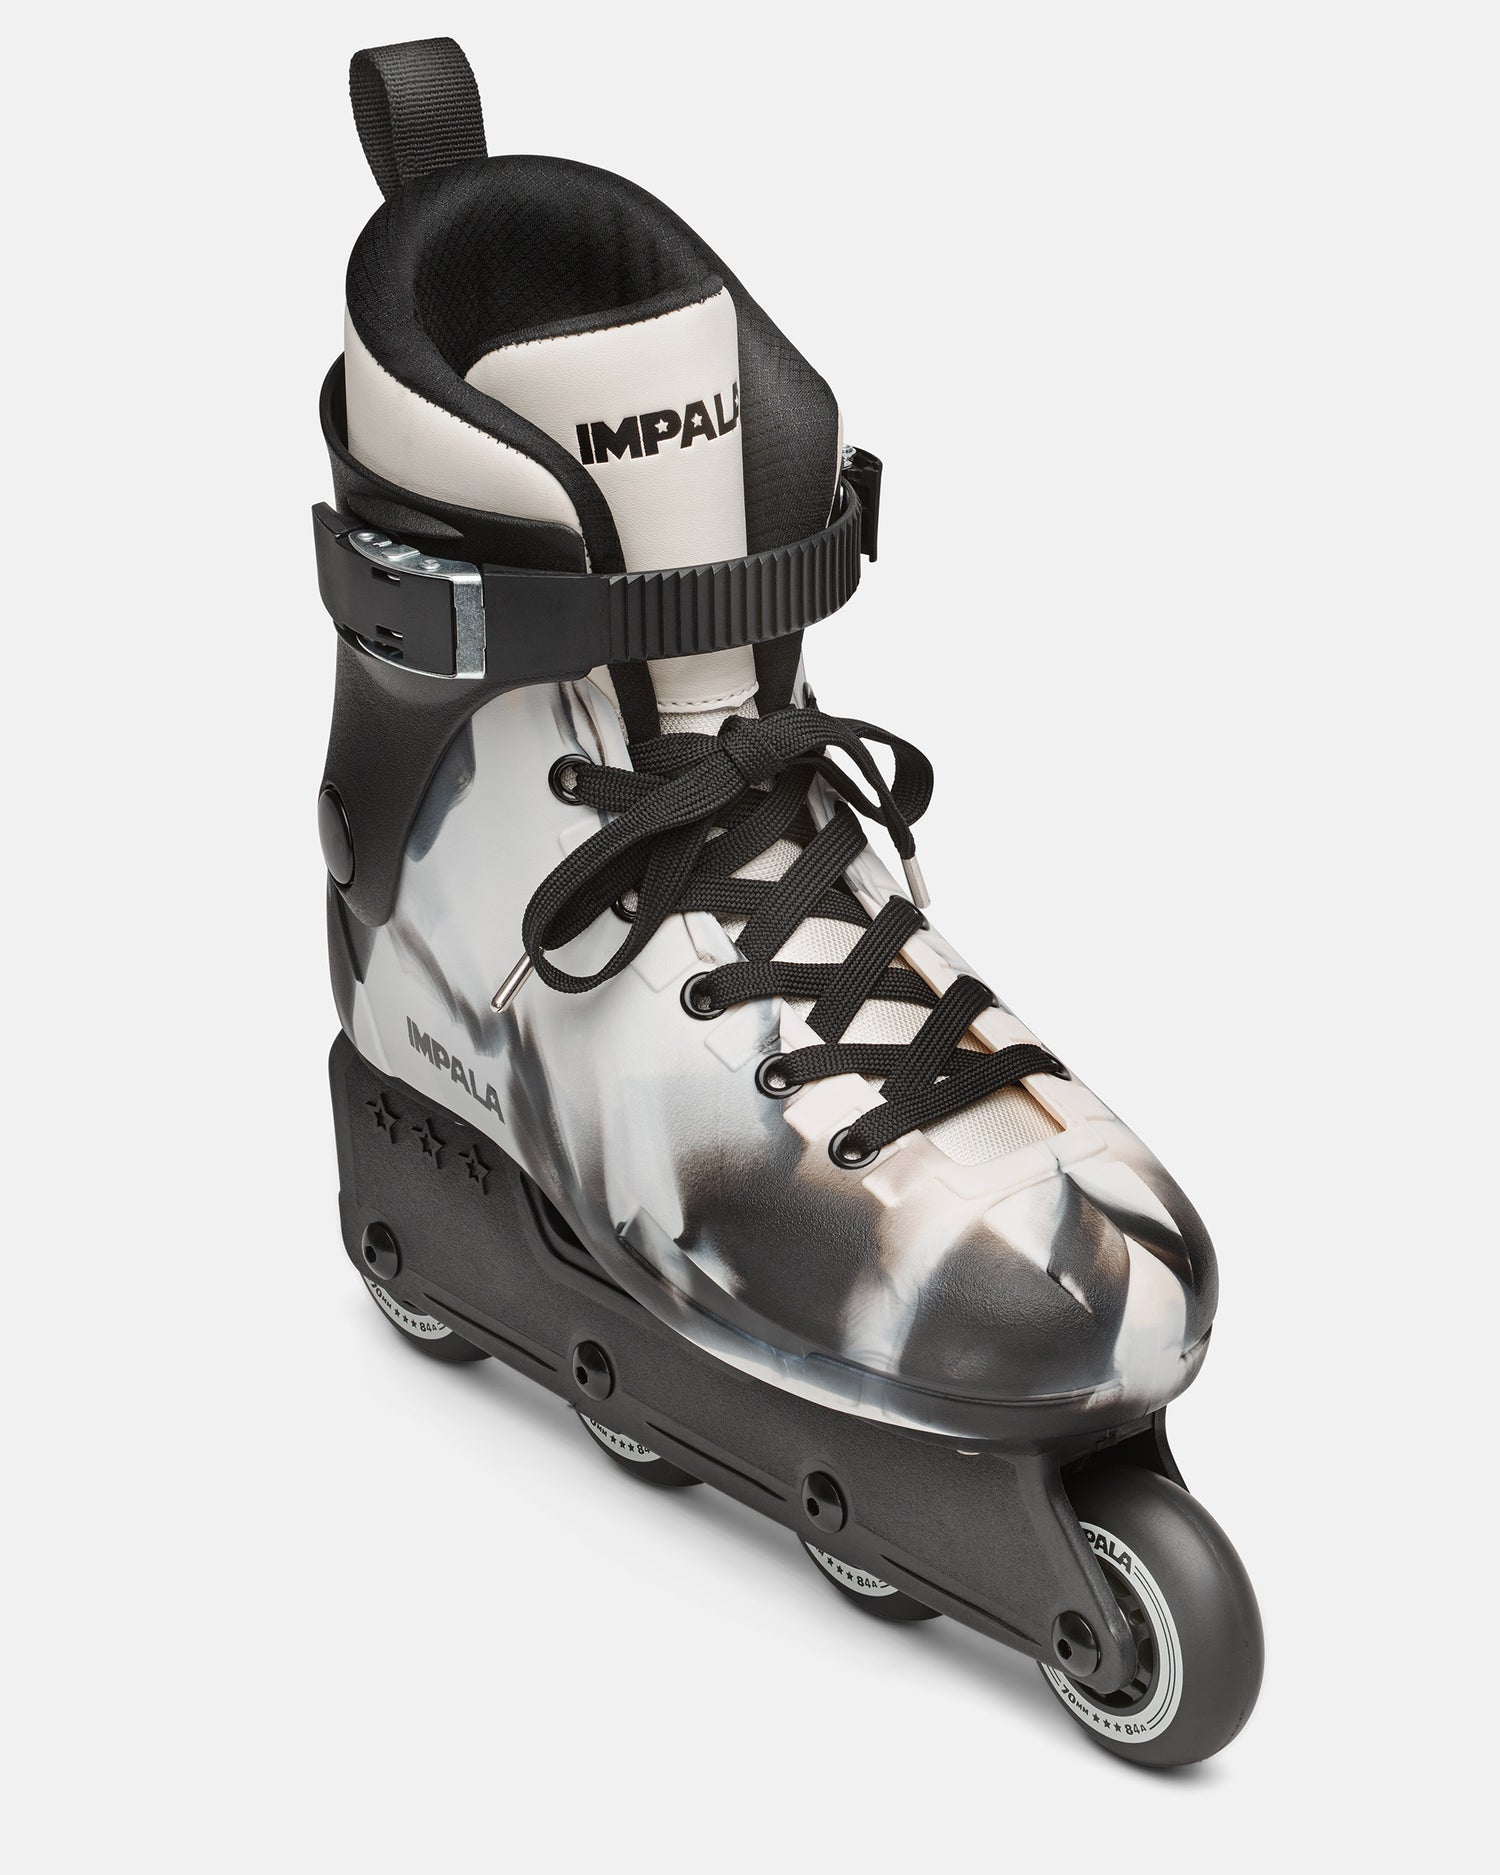 front angle of the Impala Lightspeed Inline Skate - Monochrome Marble